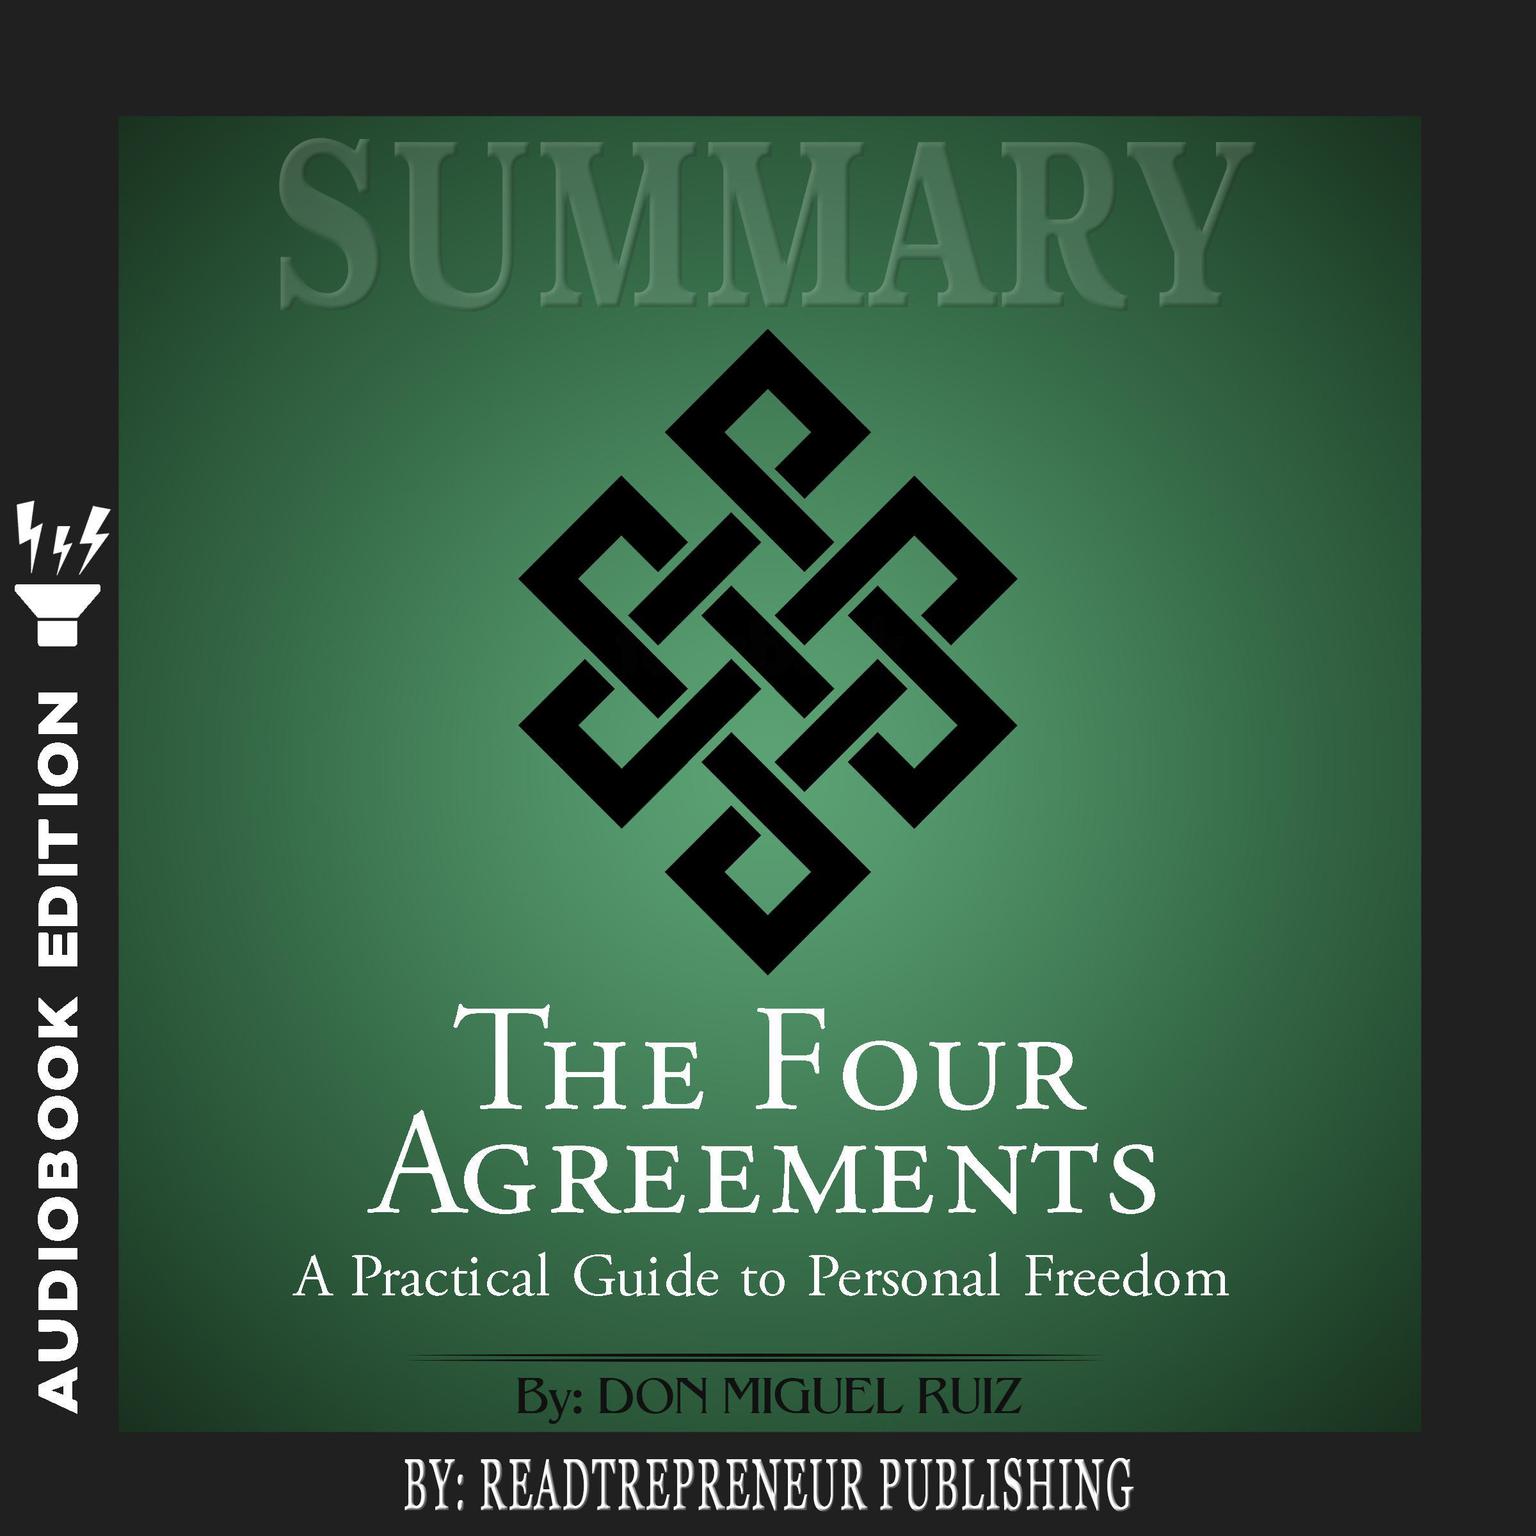 Summary of The Four Agreements: A Practical Guide to Personal Freedom (A Toltec Wisdom Book) by Don Miguel Ruiz Audiobook, by Readtrepreneur Publishing